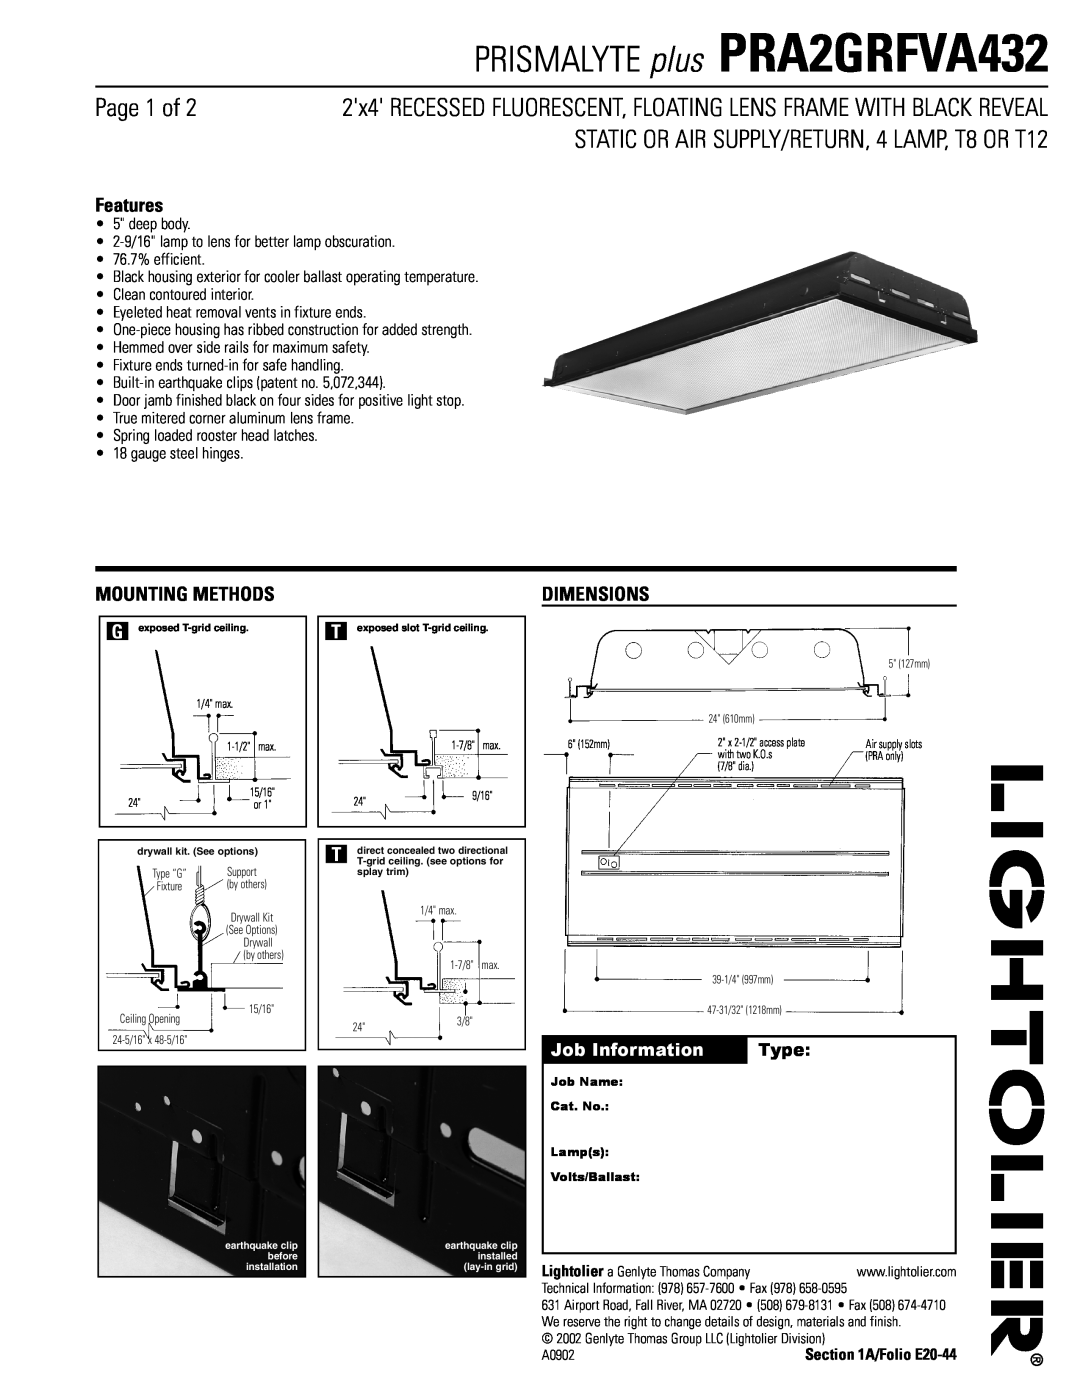 Lightolier dimensions PRISMALYTE plus PRA2GRFVA432, Page 1 of, STATIC OR AIR SUPPLY/RETURN, 4 LAMP, T8 OR T12, Features 